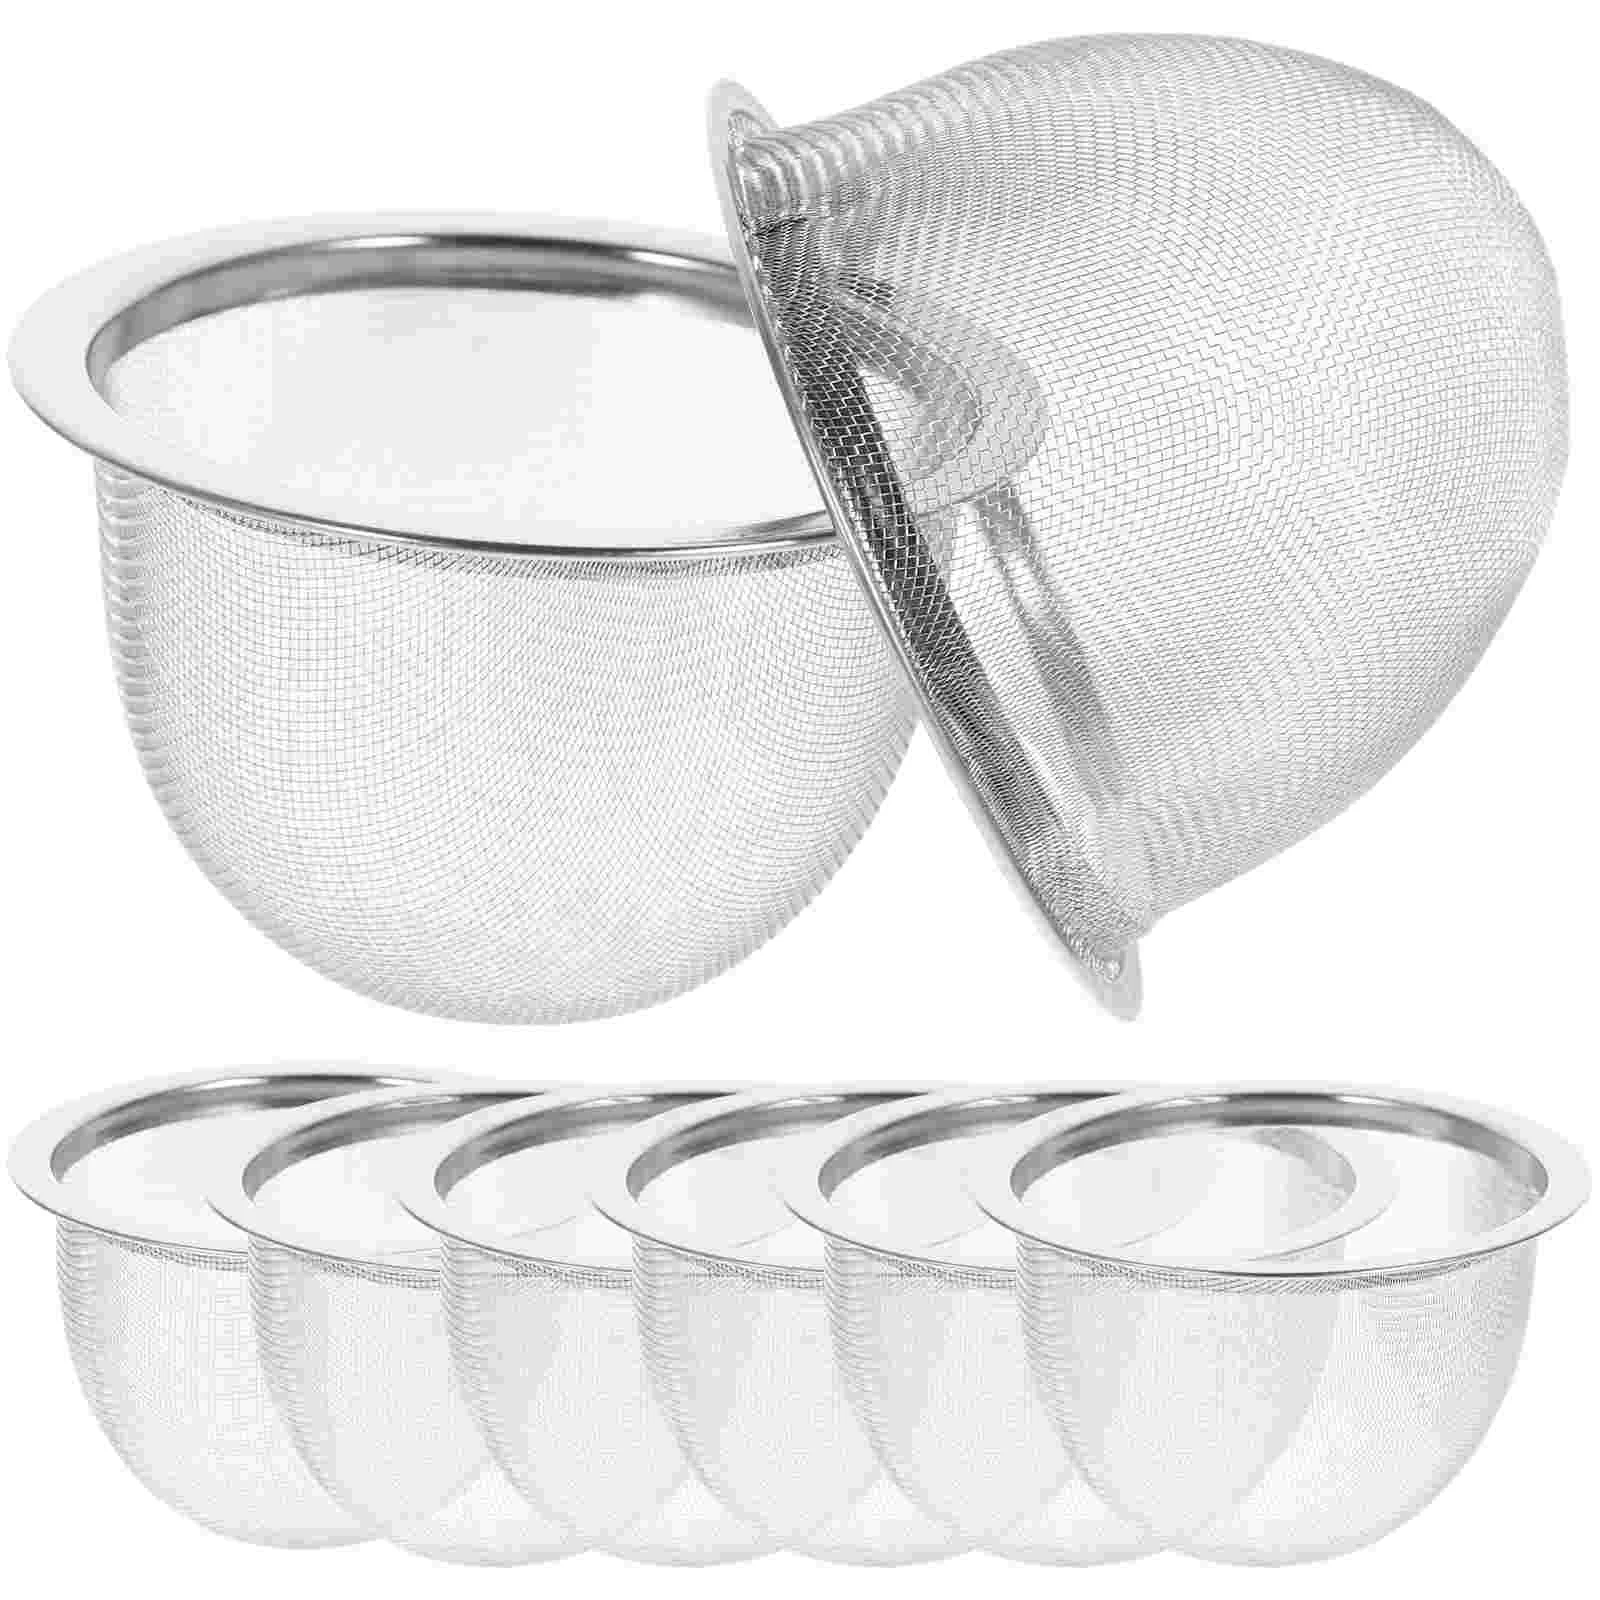 

8 Pcs Infuser Filter Fine Mesh Tea Bulk Bags Ball Strainers Stainless Steel Kettle Basket Sieve Loose Drainage